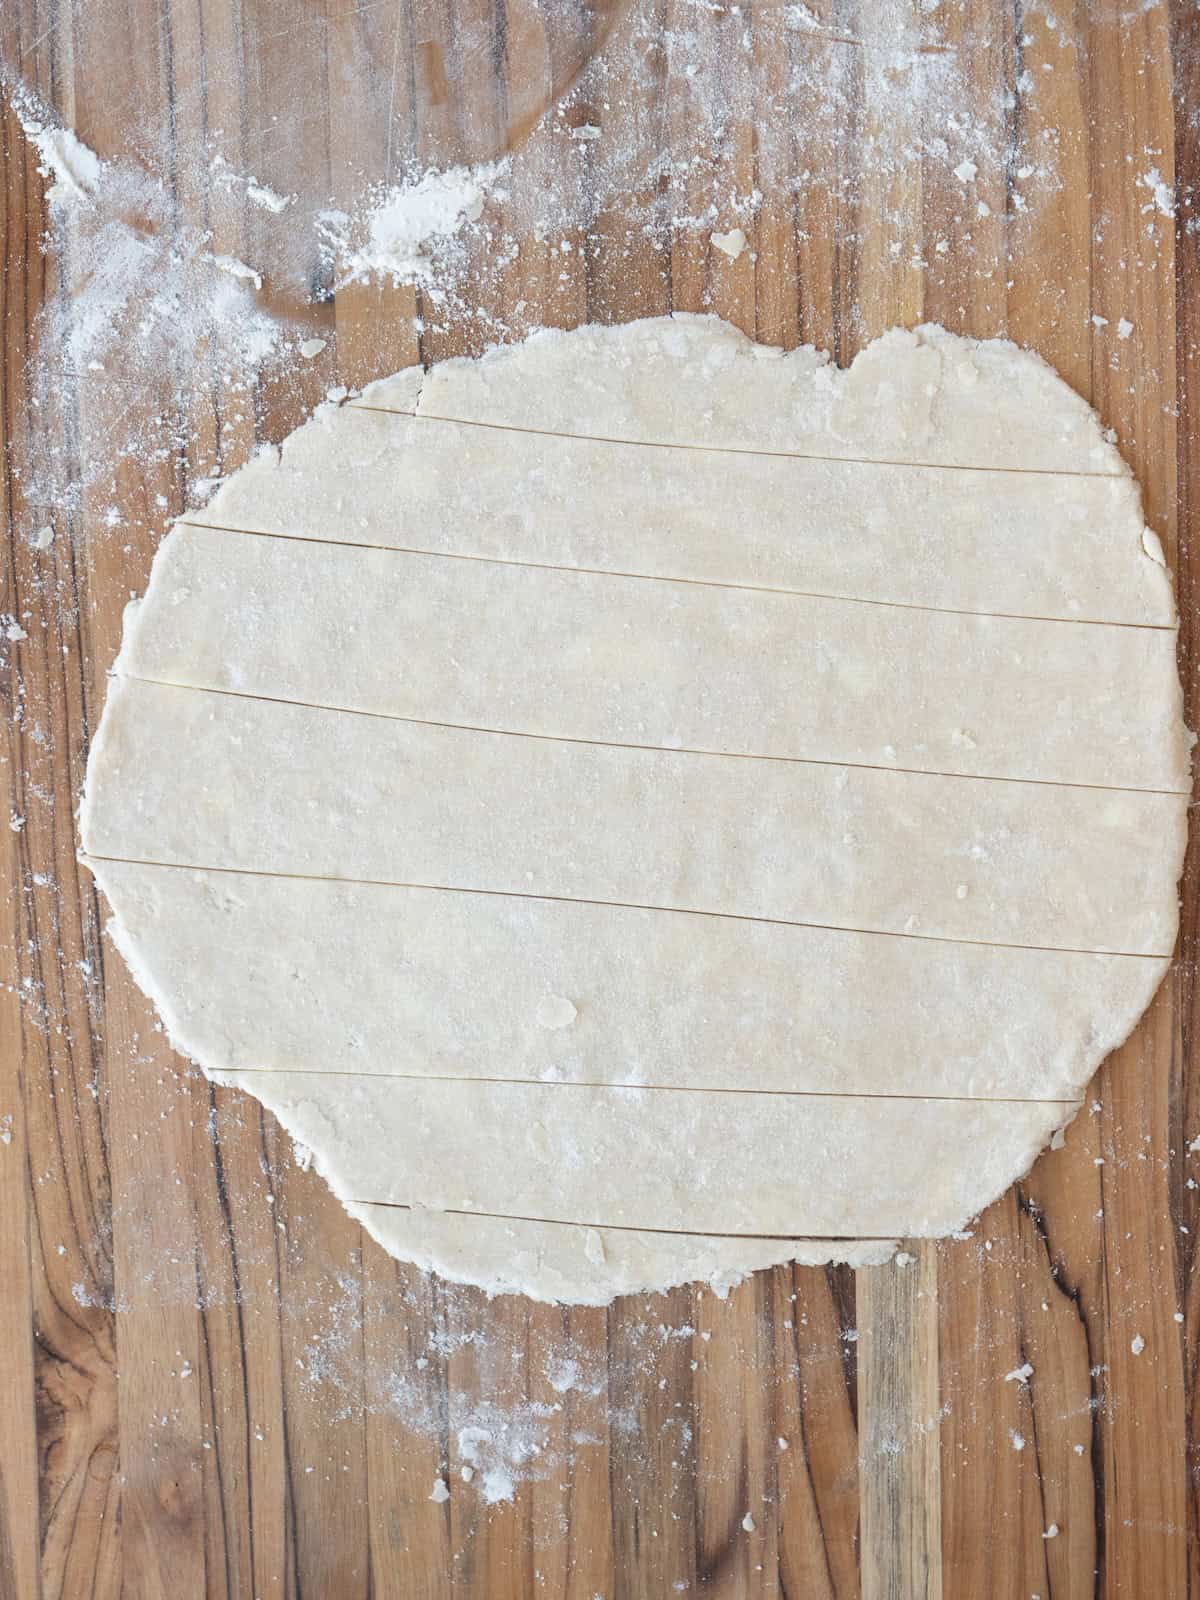 Pie dough rolled out thin and cut into strips about an inch wide.